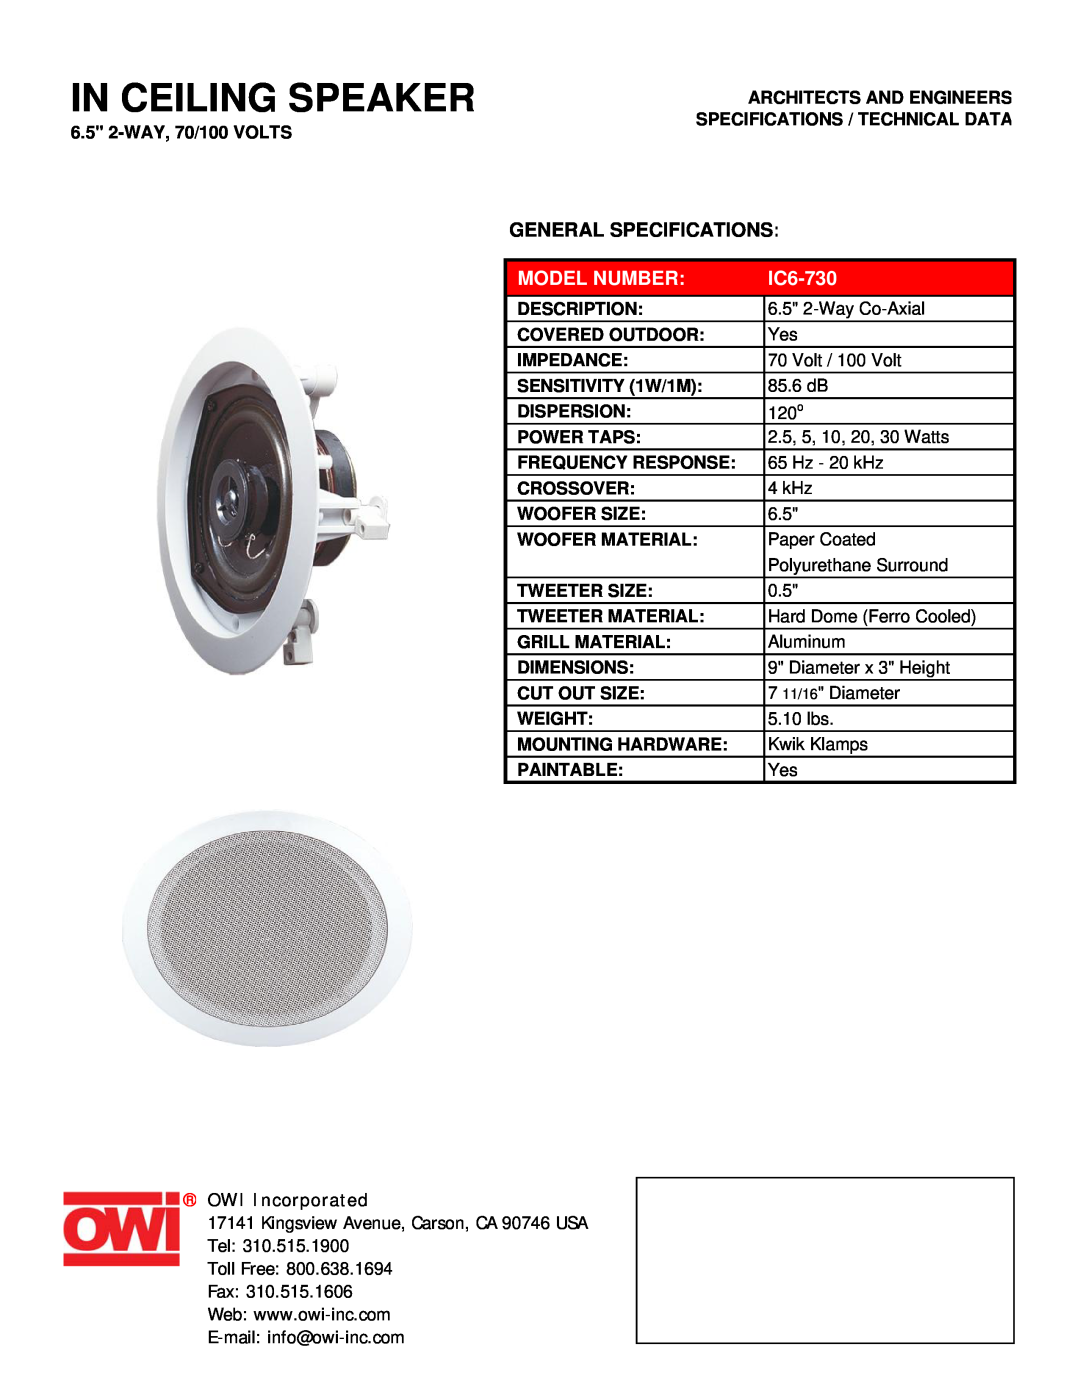 OWI IC6-730 specifications In Ceiling Speaker, General Specifications, Model Number, OWI Incorporated 